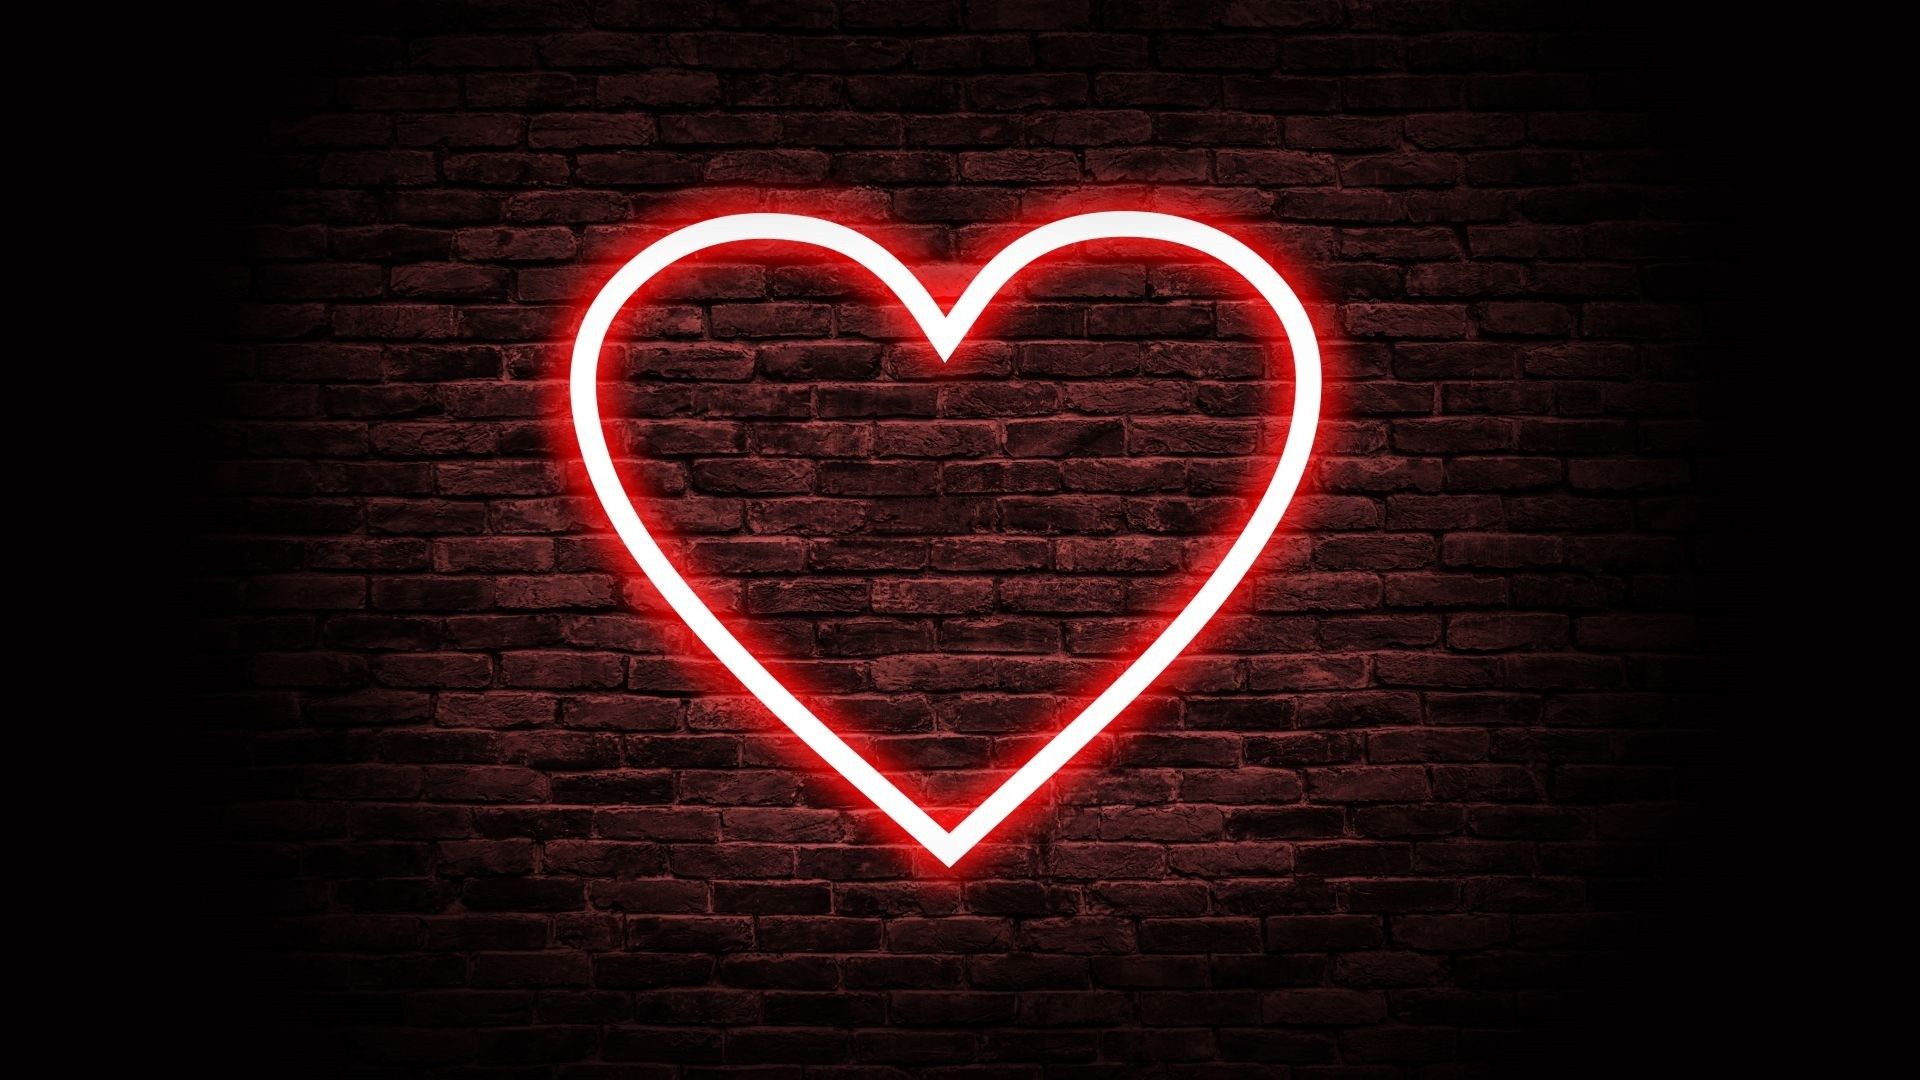 A red neon heart on a brick wall - Heart